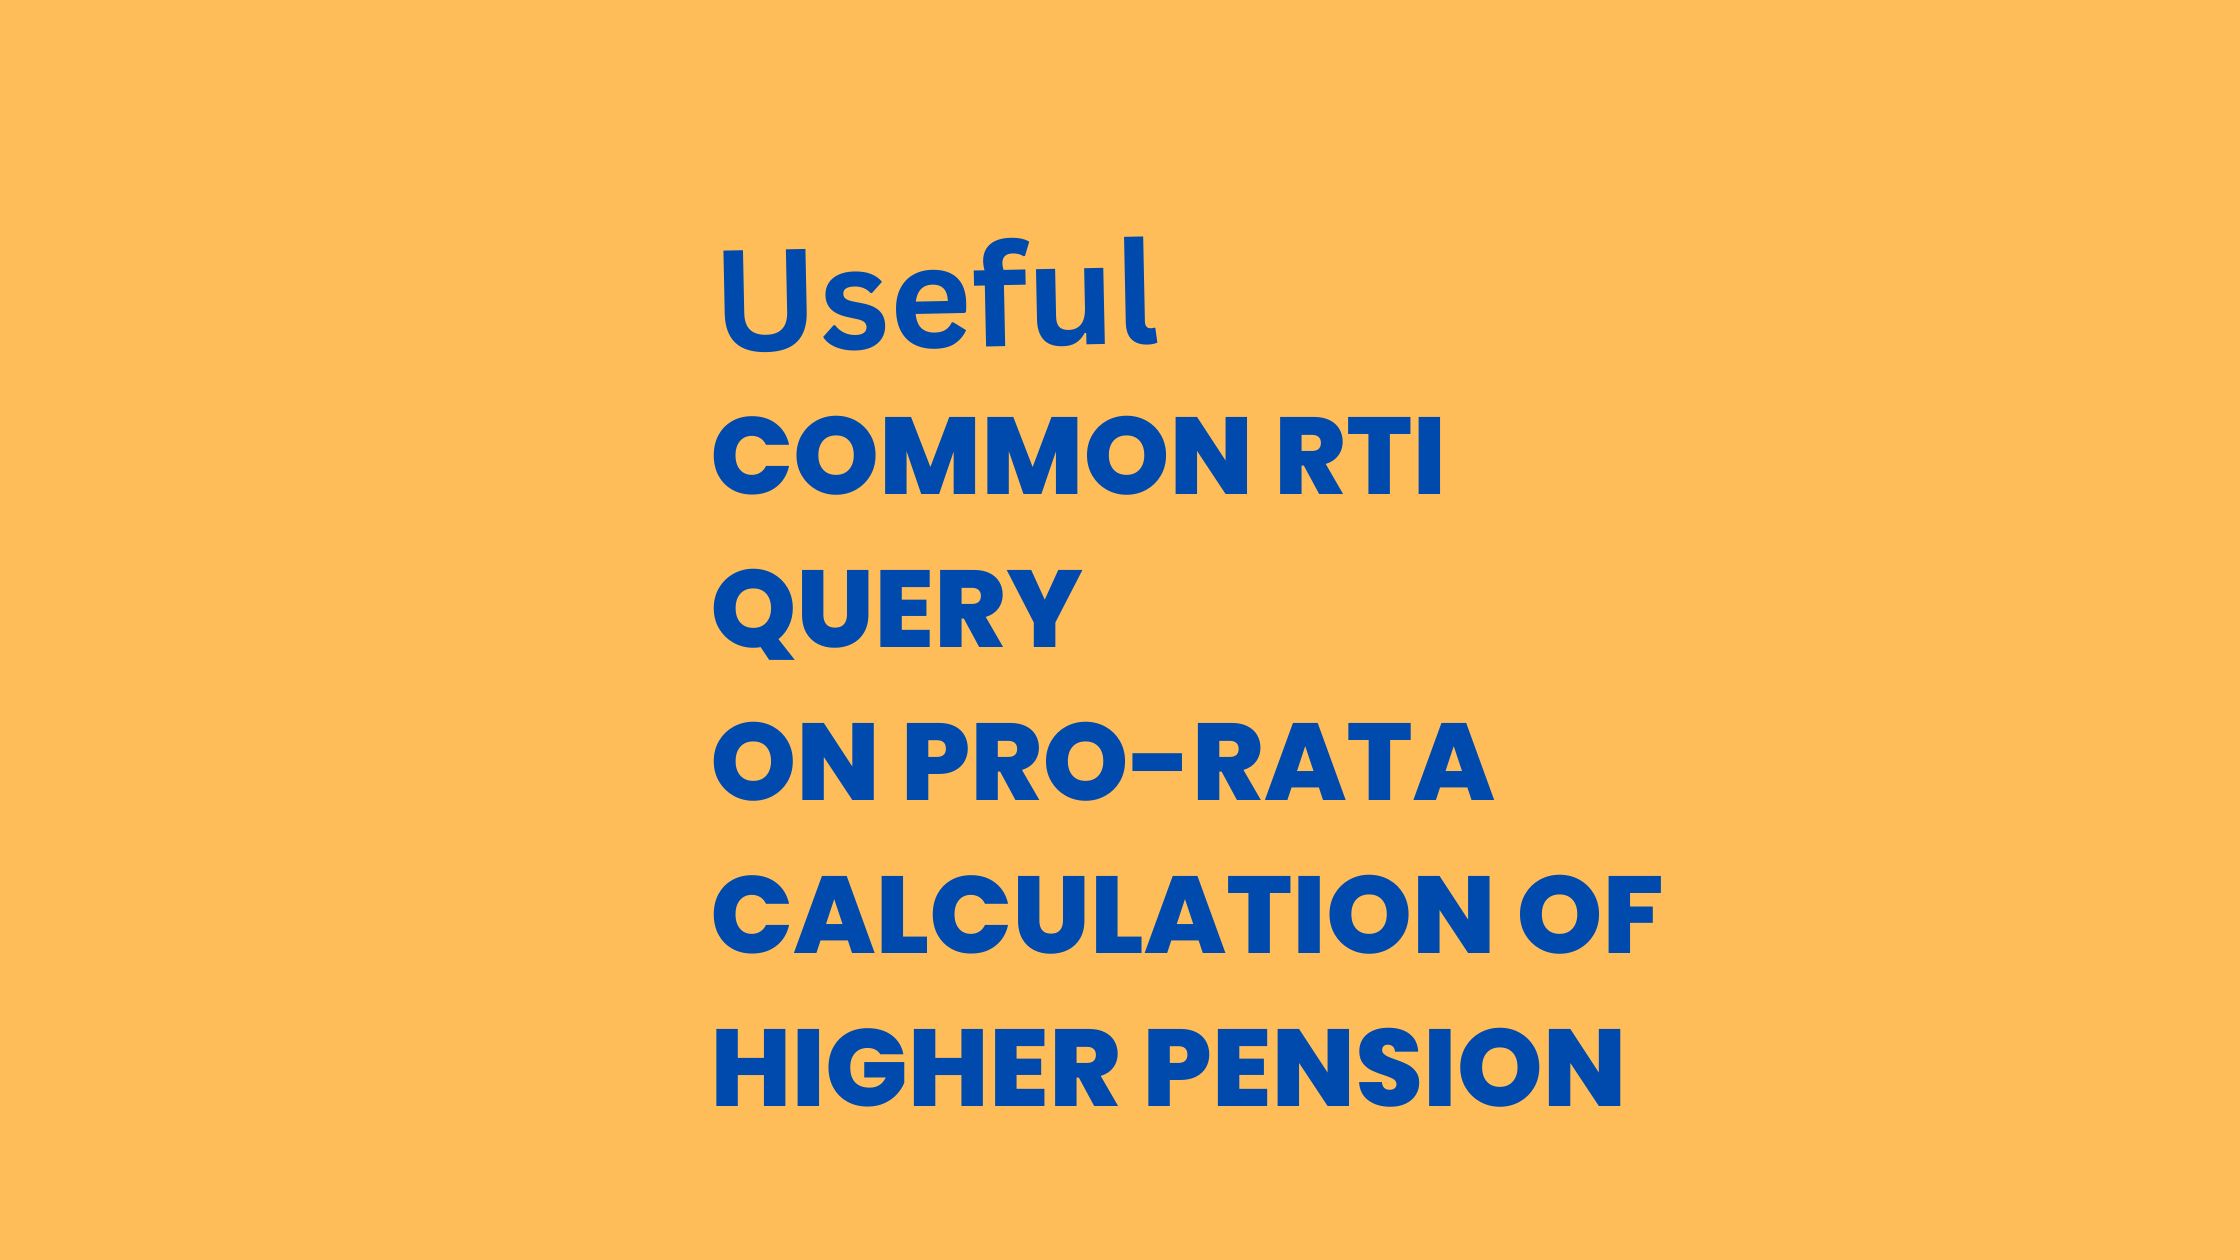 Useful Common RTI Query on Pro-rata calculation of Higher Pension